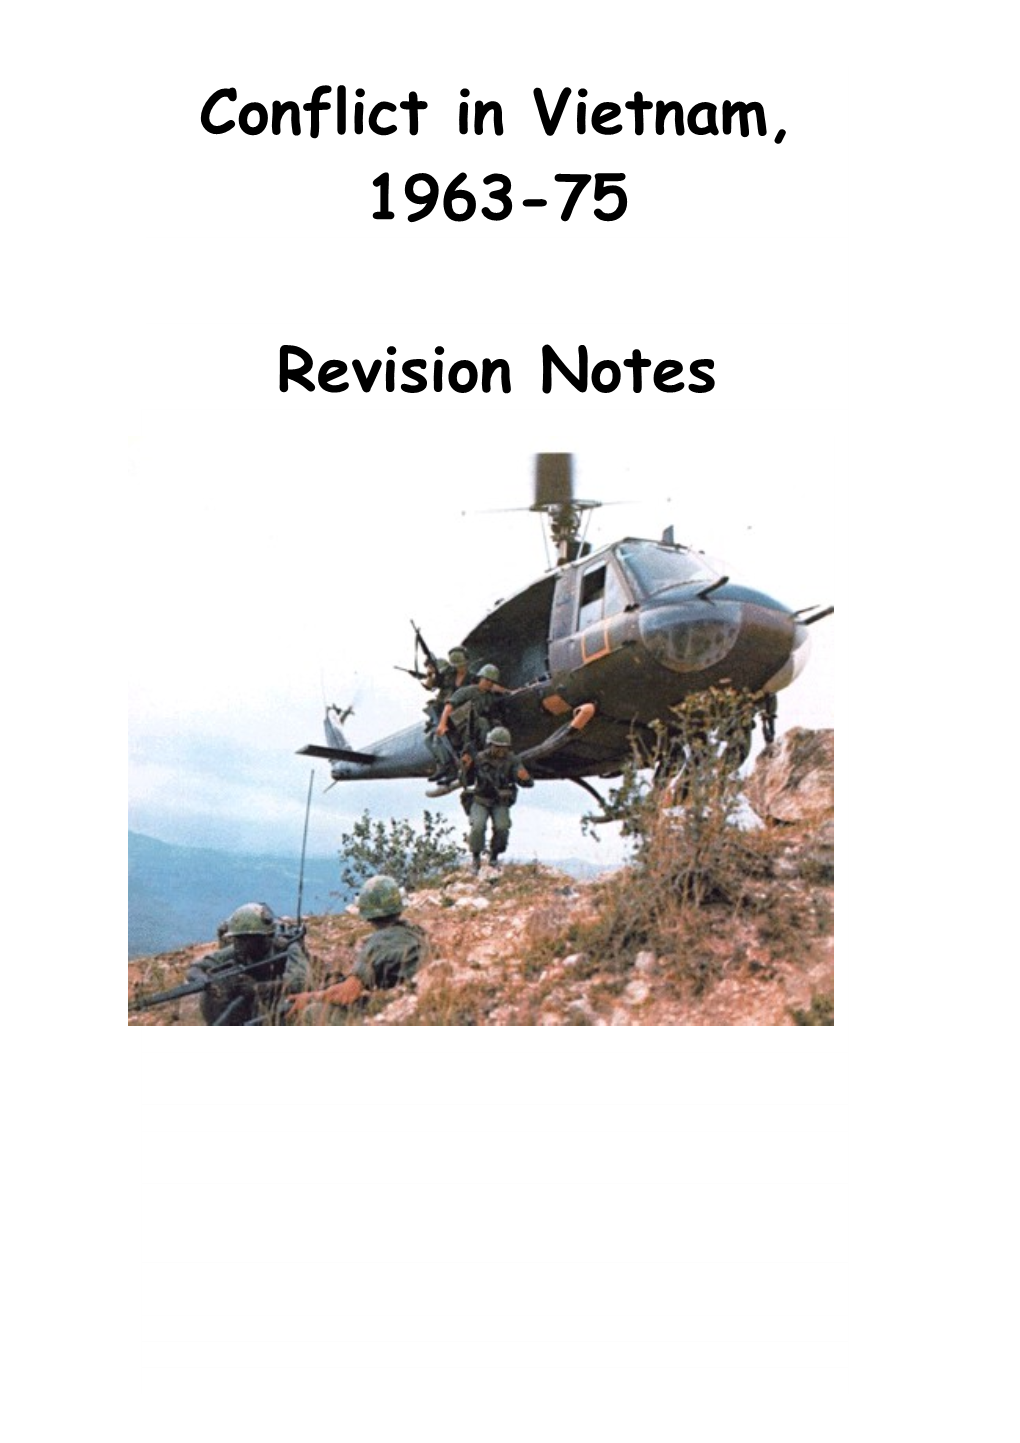 Revision Notes on the Vietnam War